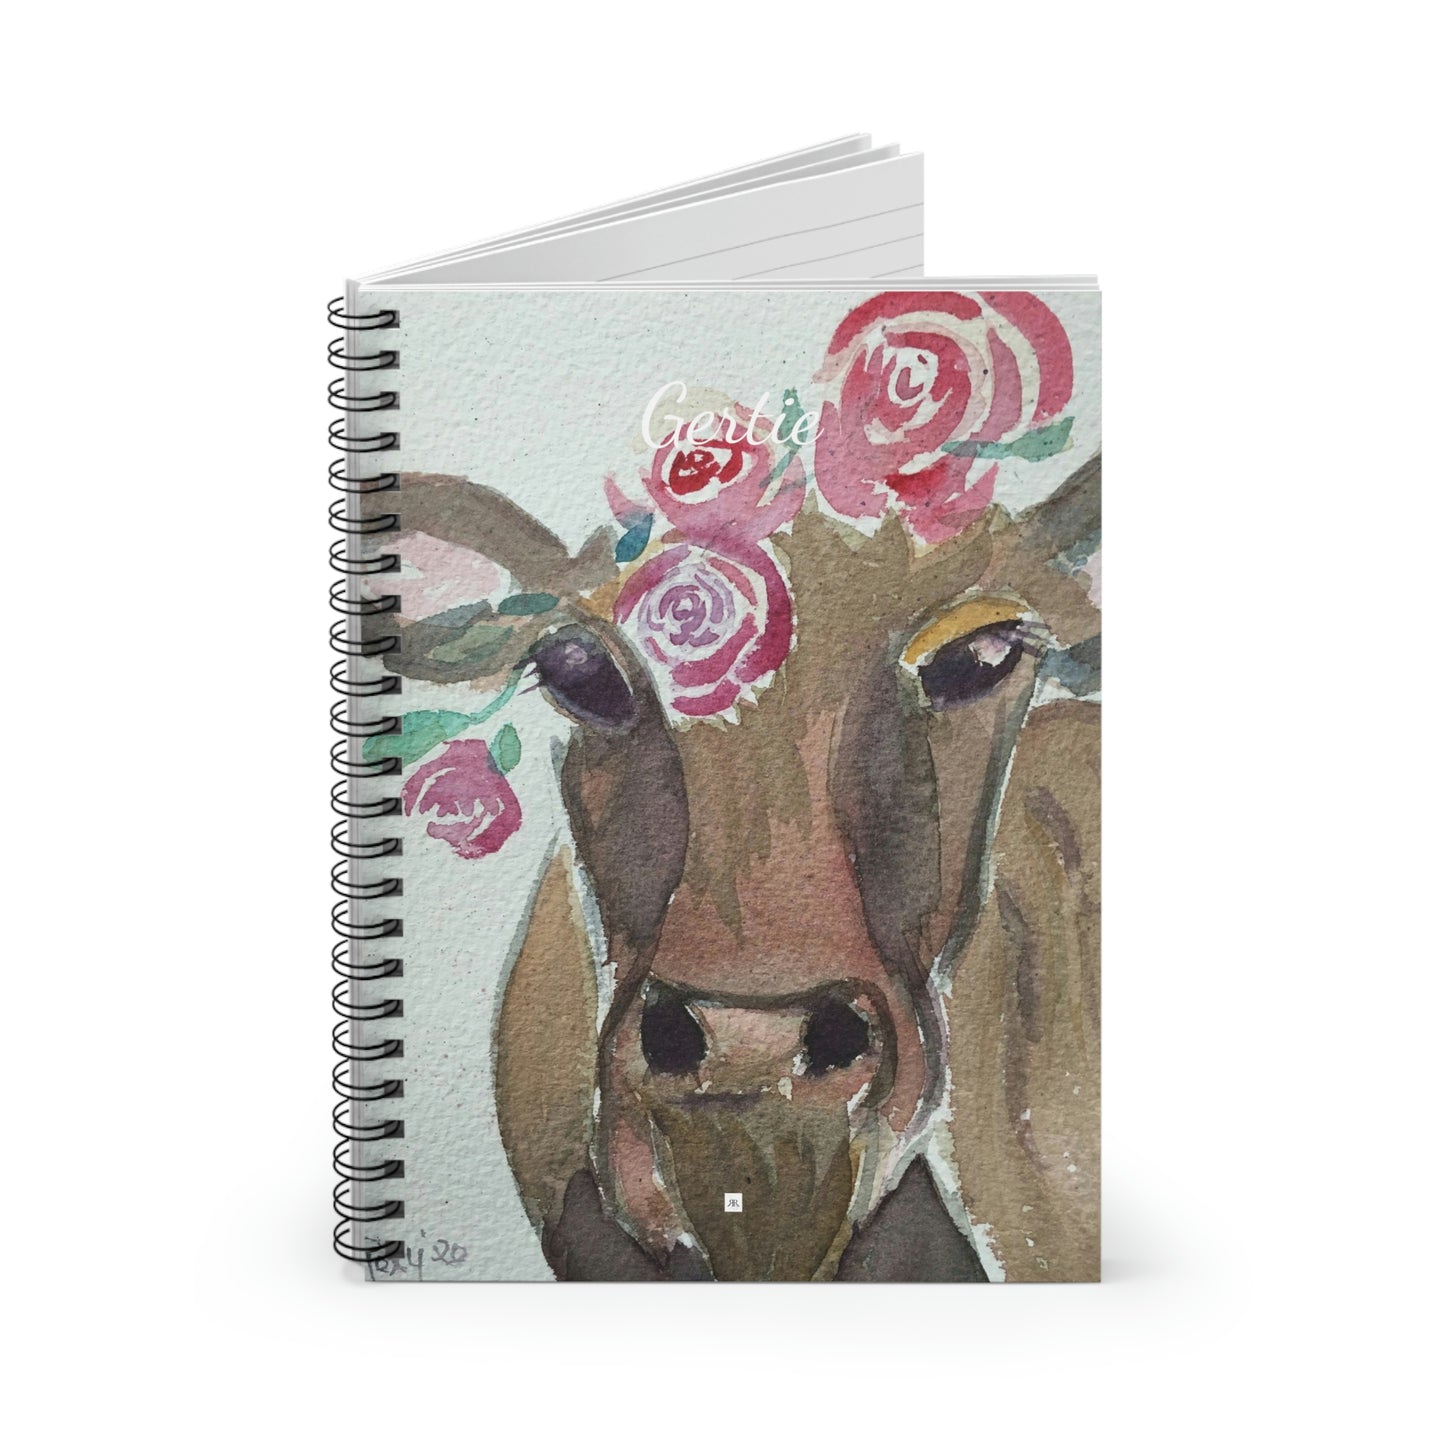 Gertie -Whimsical Cow Painting  Spiral Notebook